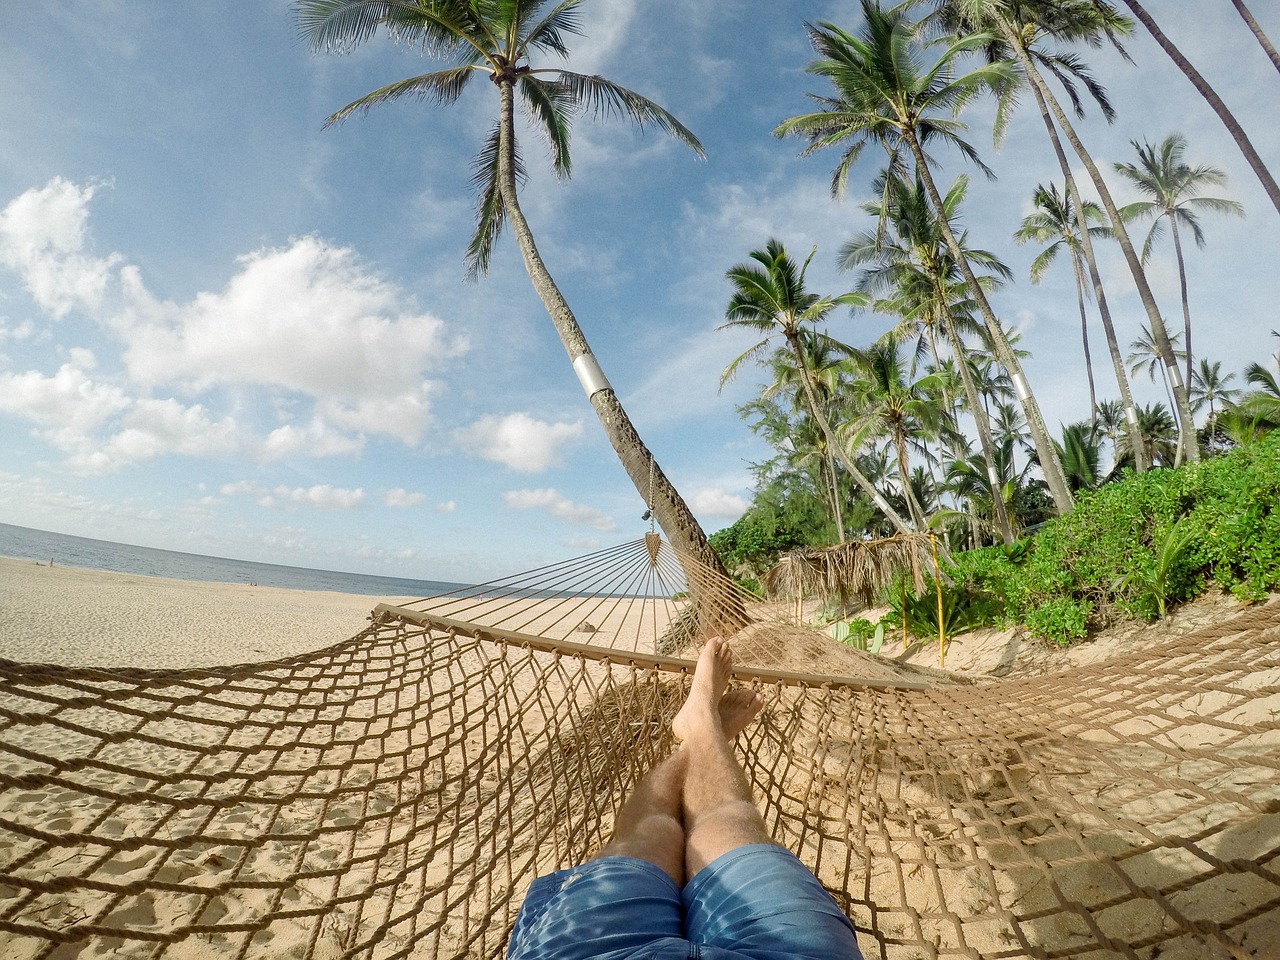 Napping on a hammock on the beach.